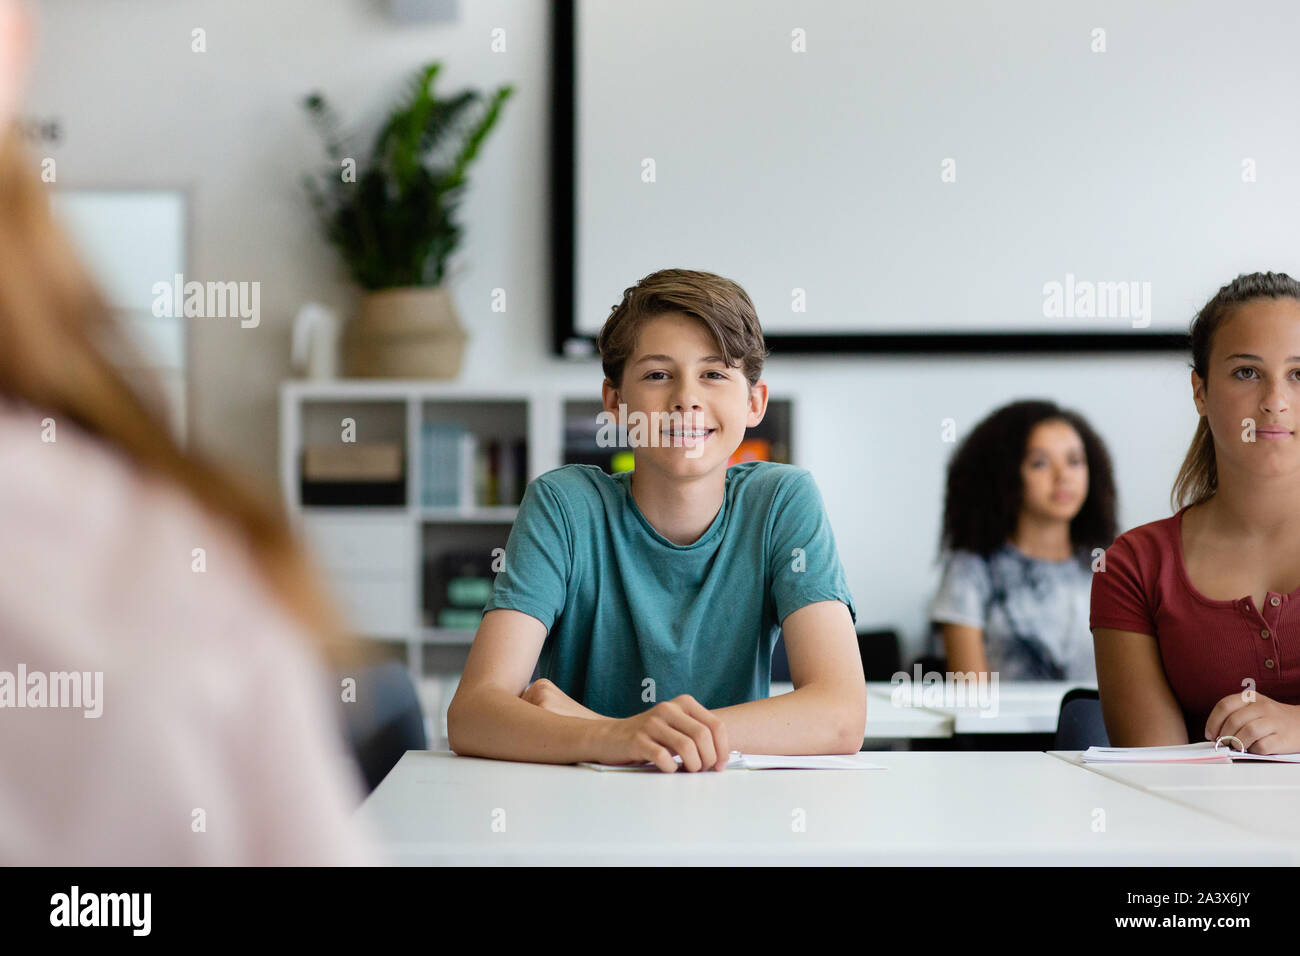 Portrait of male high school student in class Banque D'Images